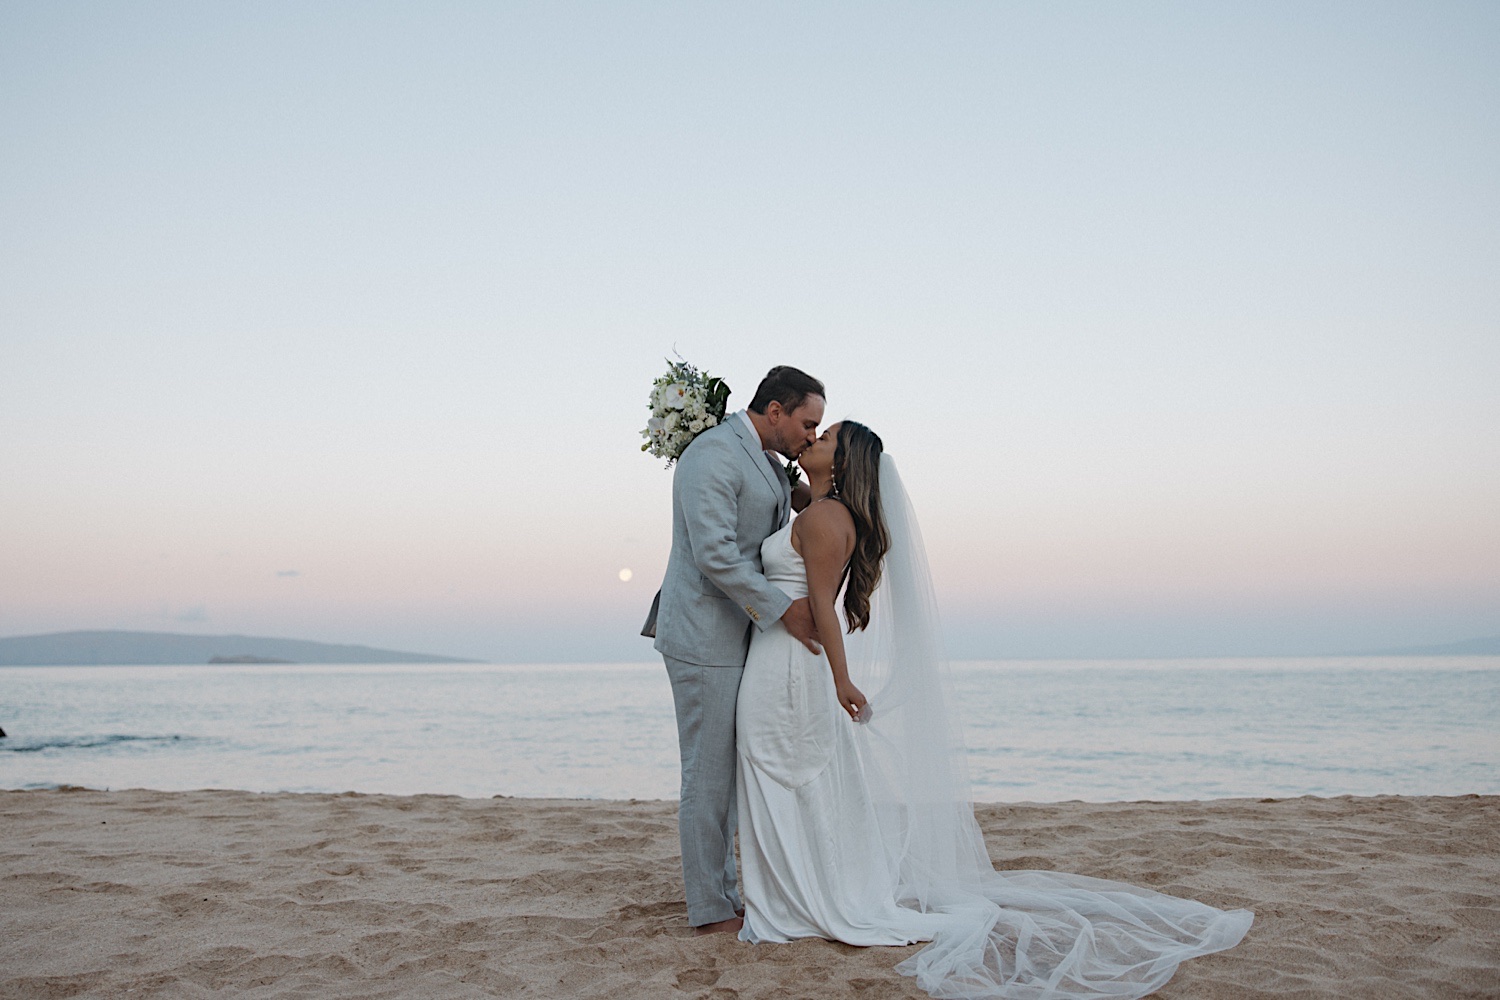 Bride in white silk dress kisses groom in grey wedding suit on the beach during Maui Elopement Wedding Ceremony.